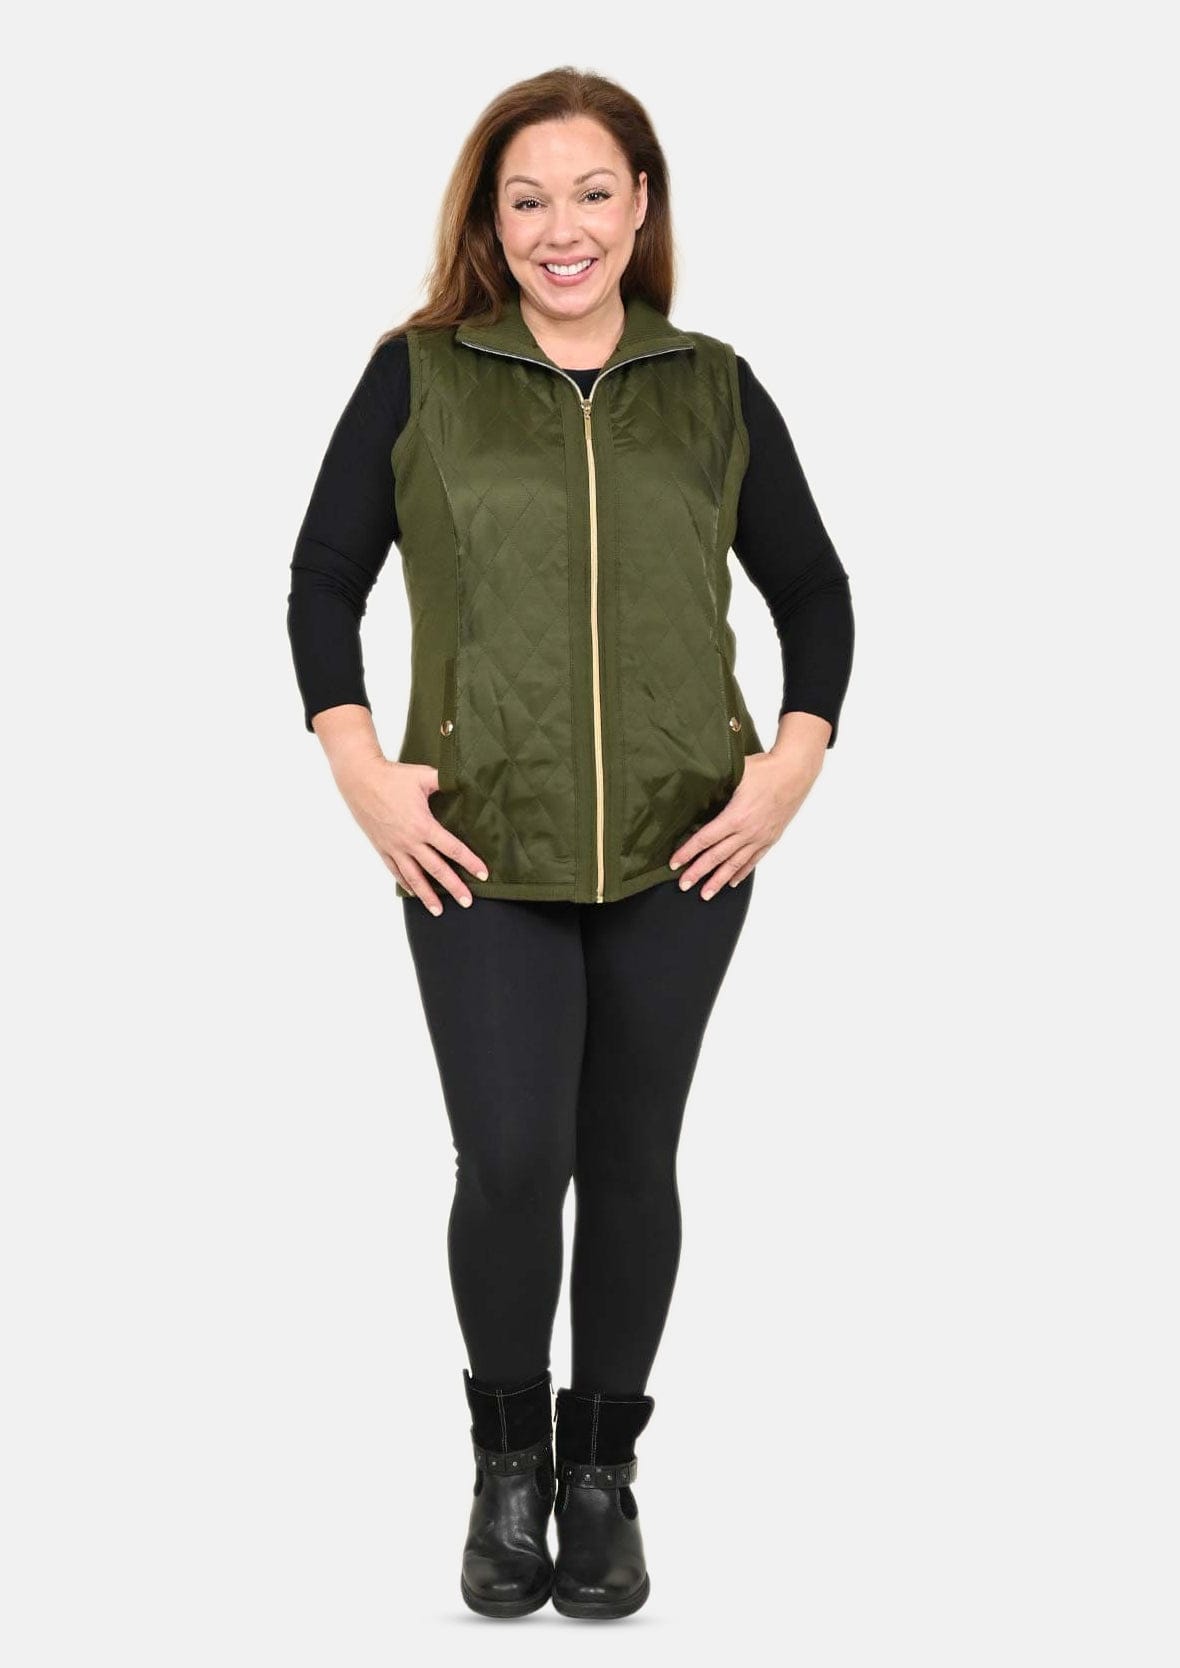 sleeveless knit olive vest with quilted pattern #color_Dark Olive